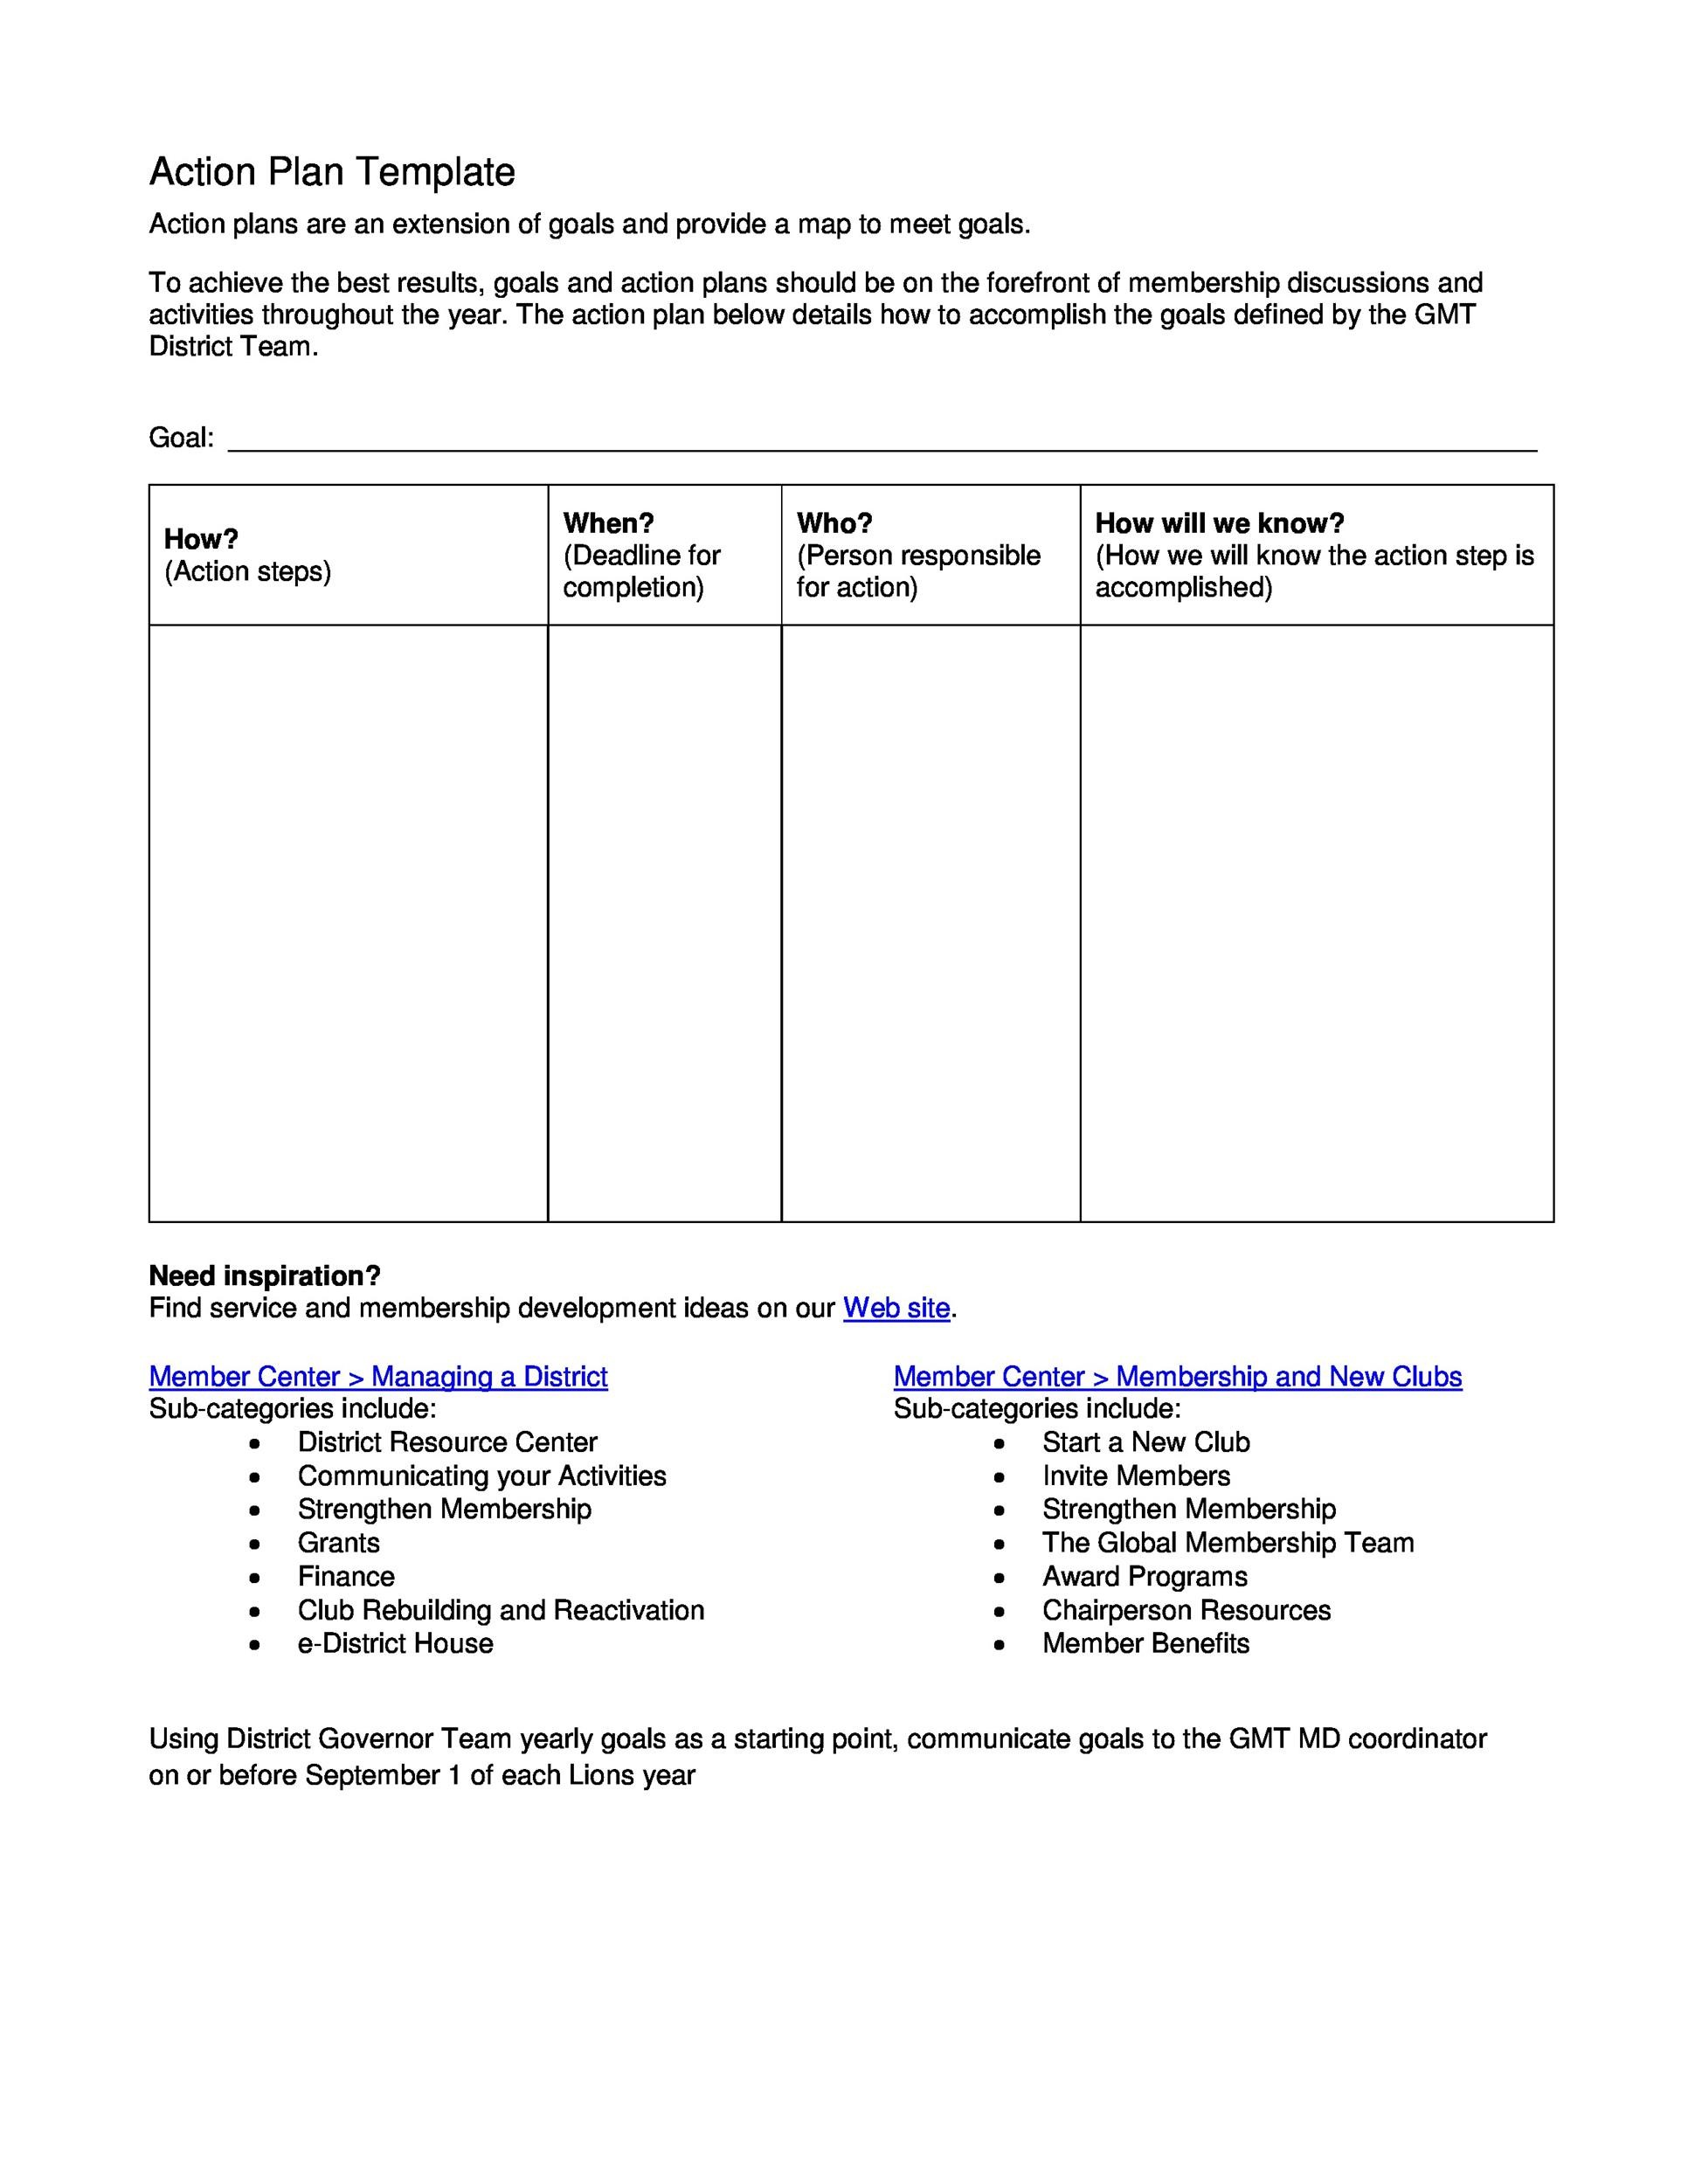 action plan template